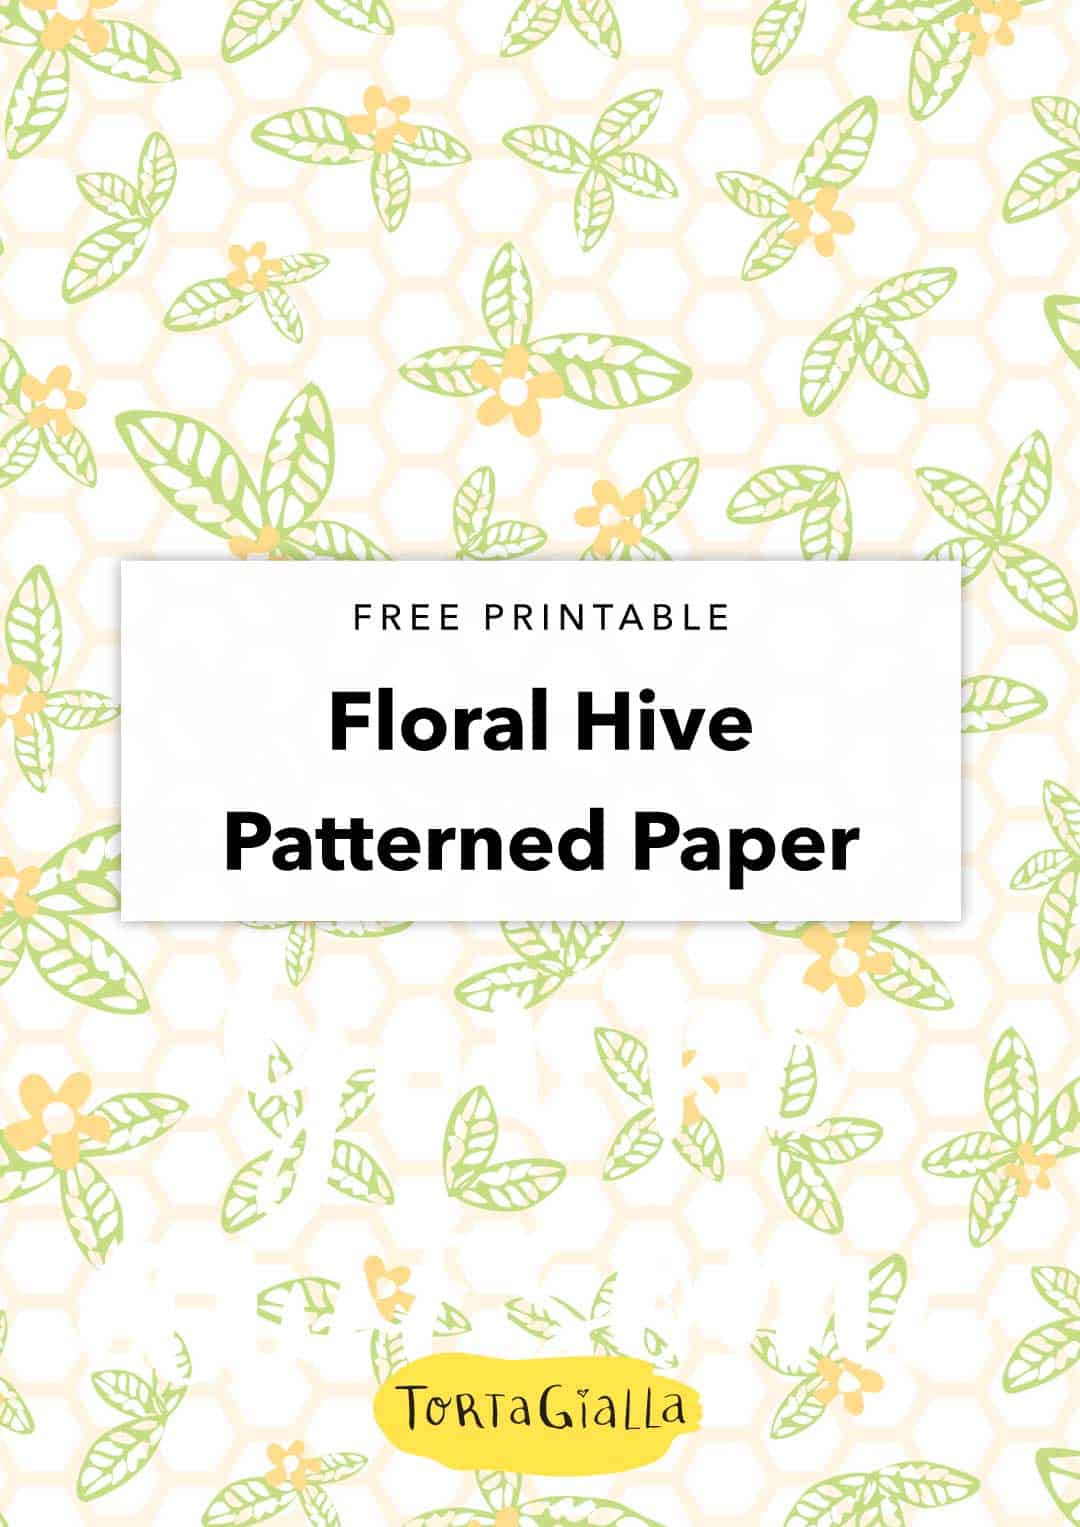 Looking for printable scrapbook paper pdf freebies? Download this happy floral honeycomb paper design for your papercrafting projects for free.